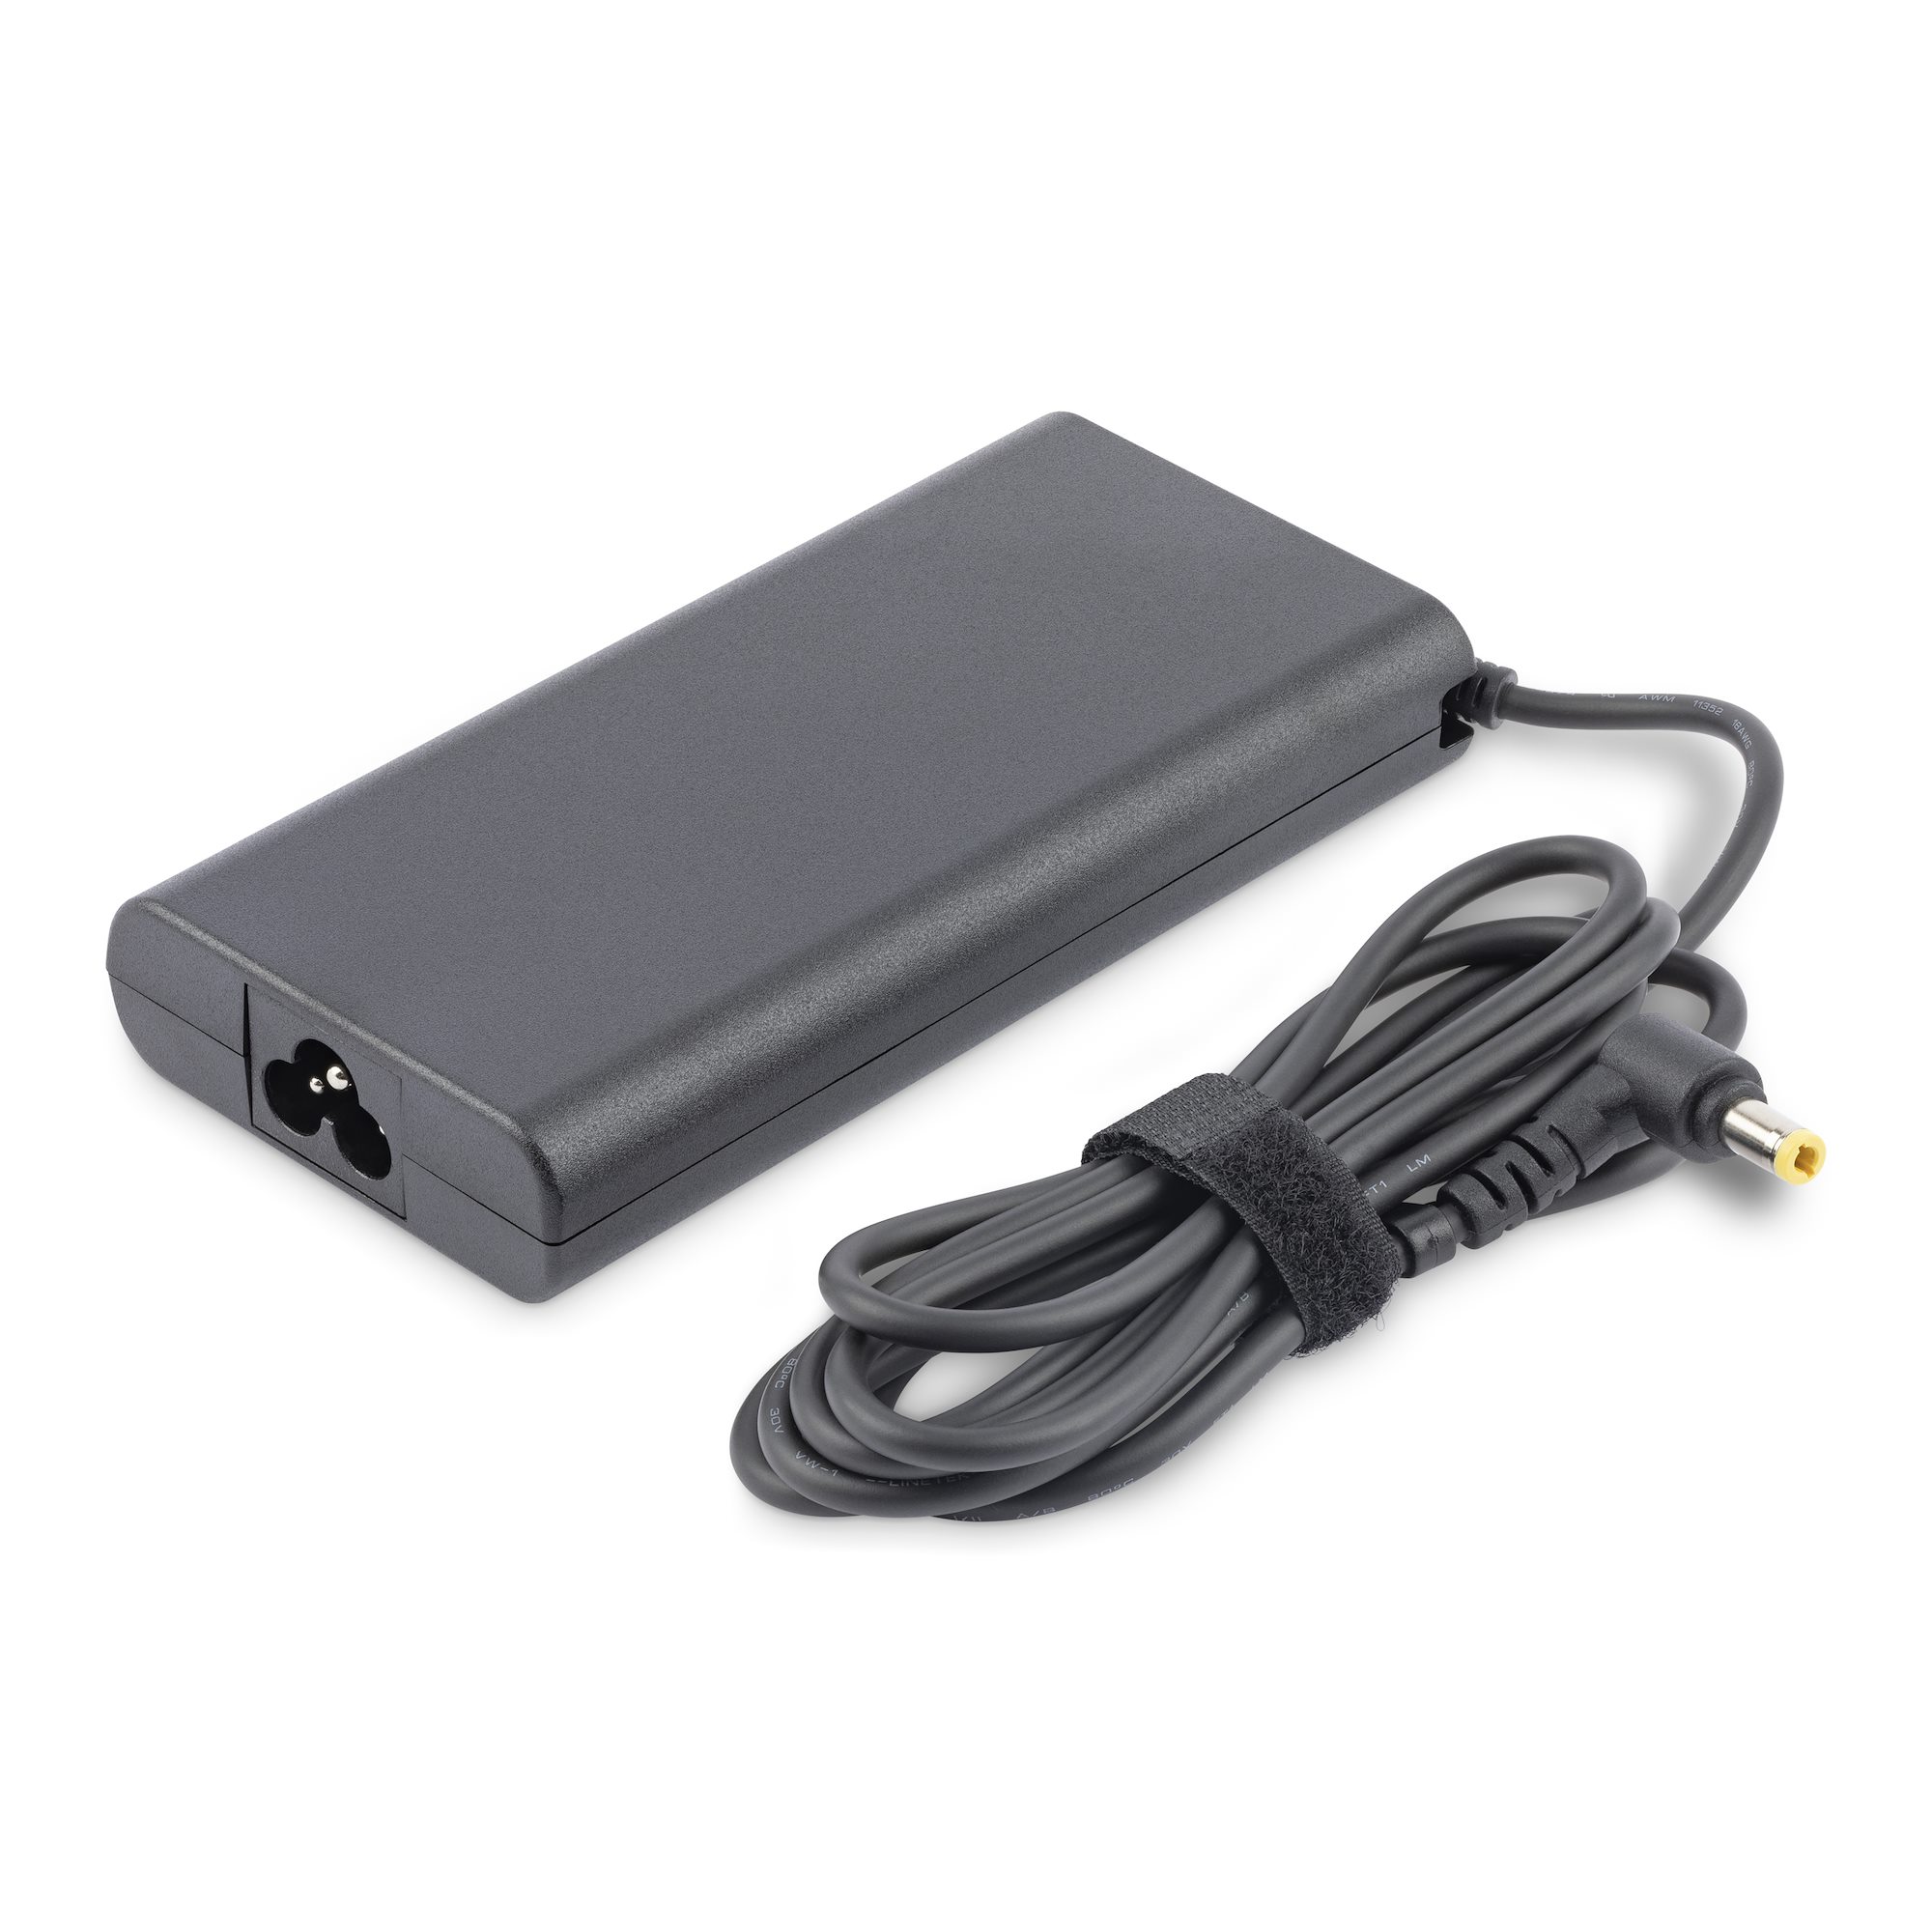 https://media.startech.com/cms/products/gallery_large/158-dockpoweradapter.a.jpg